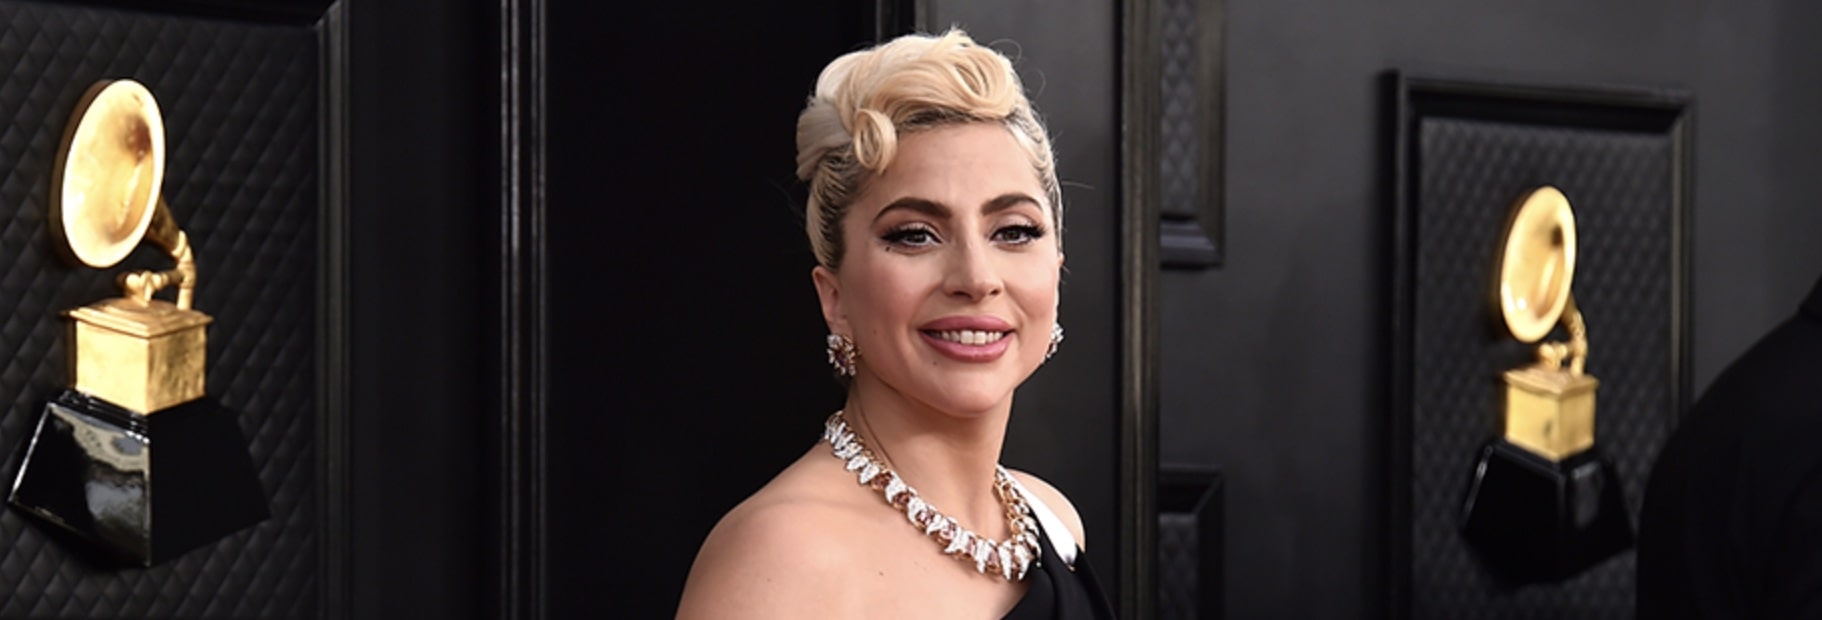 Gaga at the Grammys - Natural Look or Plastic Surgery Overload?